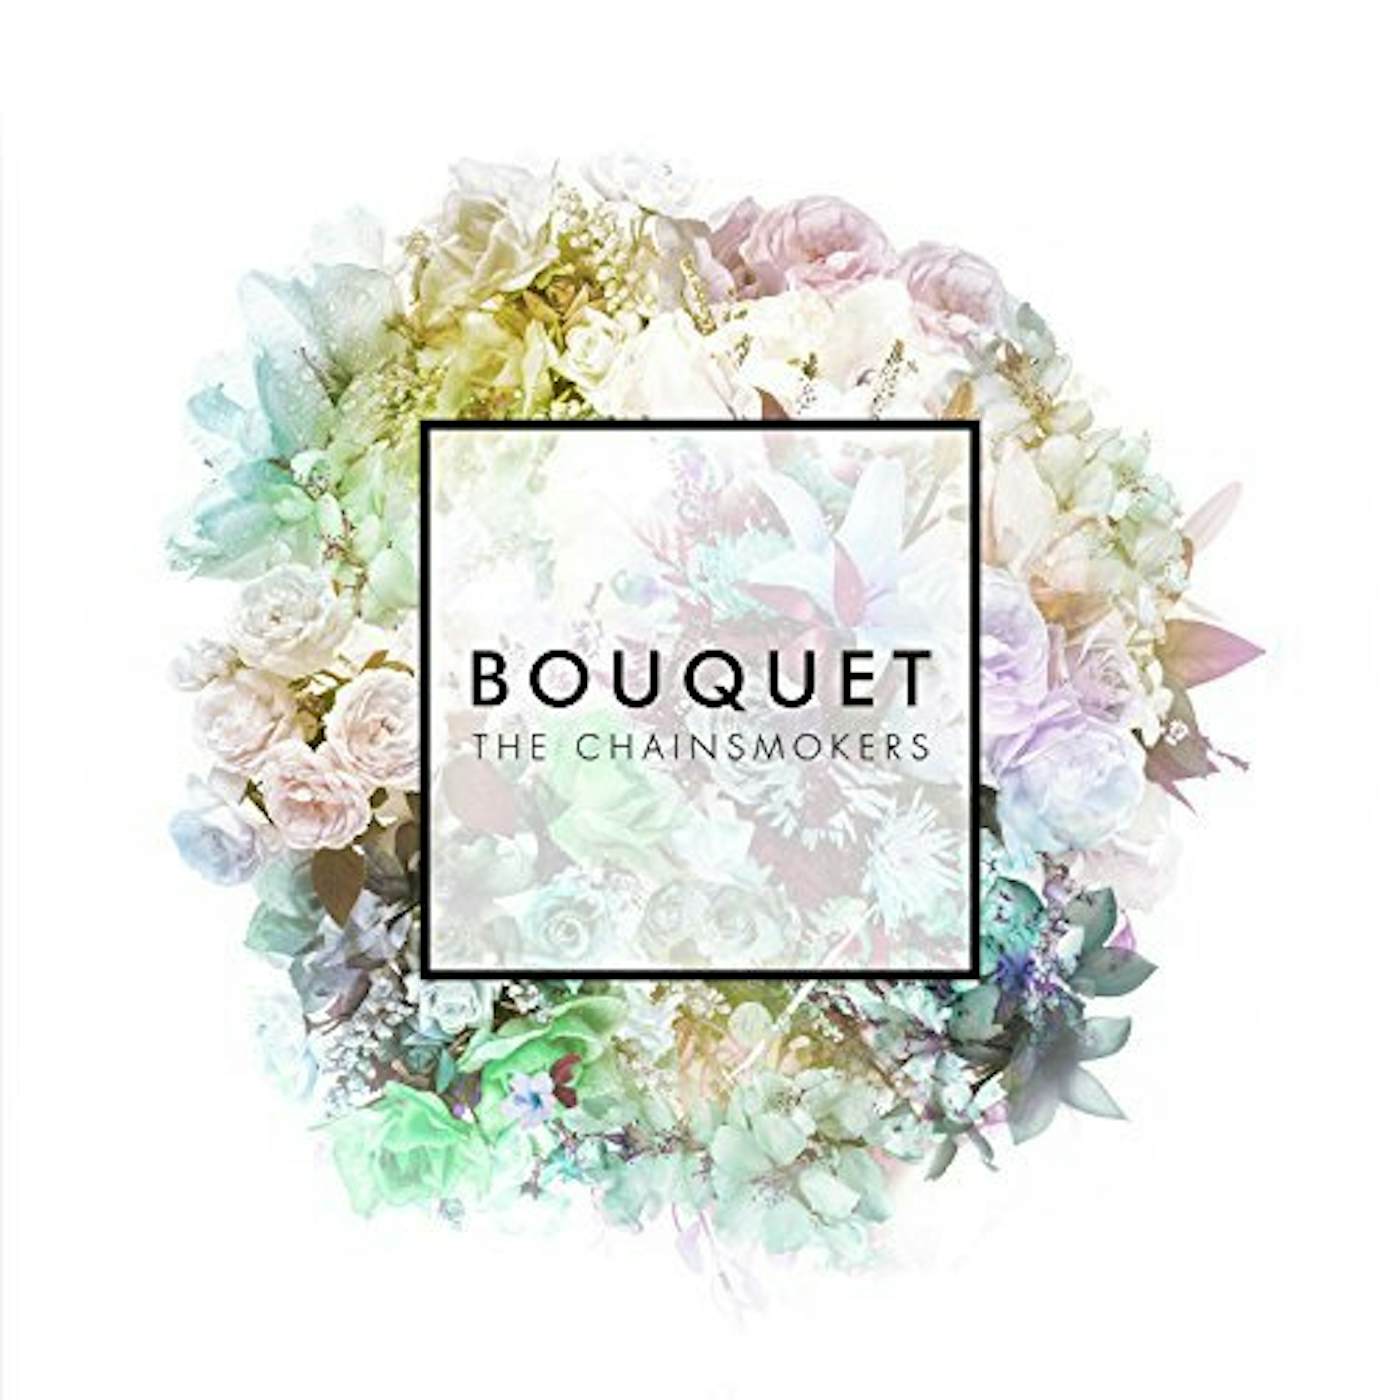 The Chainsmokers BOUQUET CD